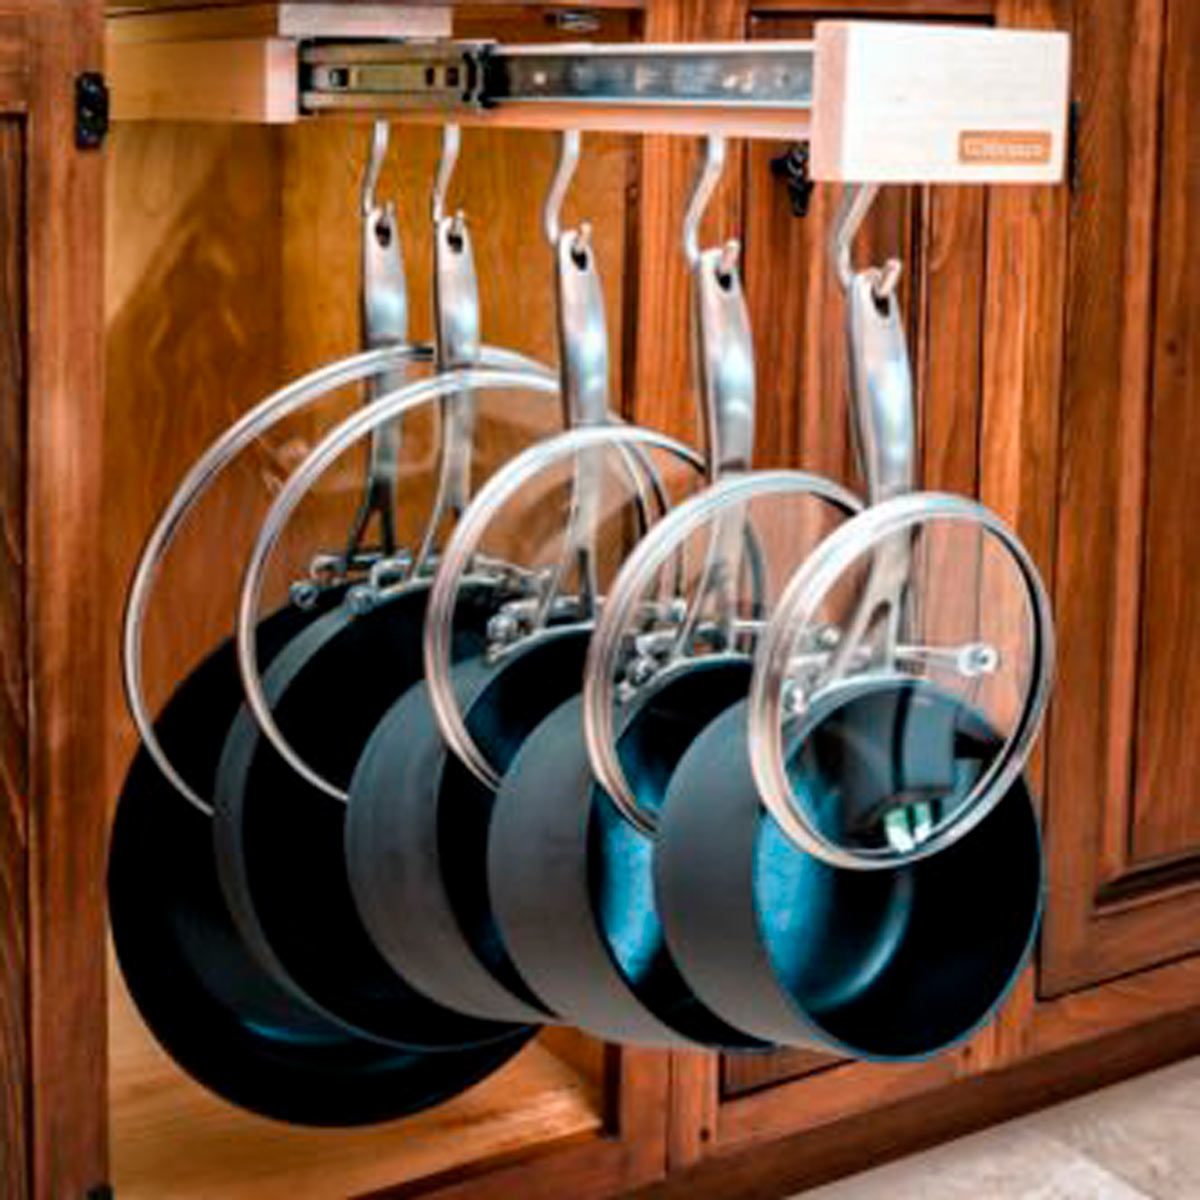 How to Store Your Mixer - The JC Huffman Cabinetry Company